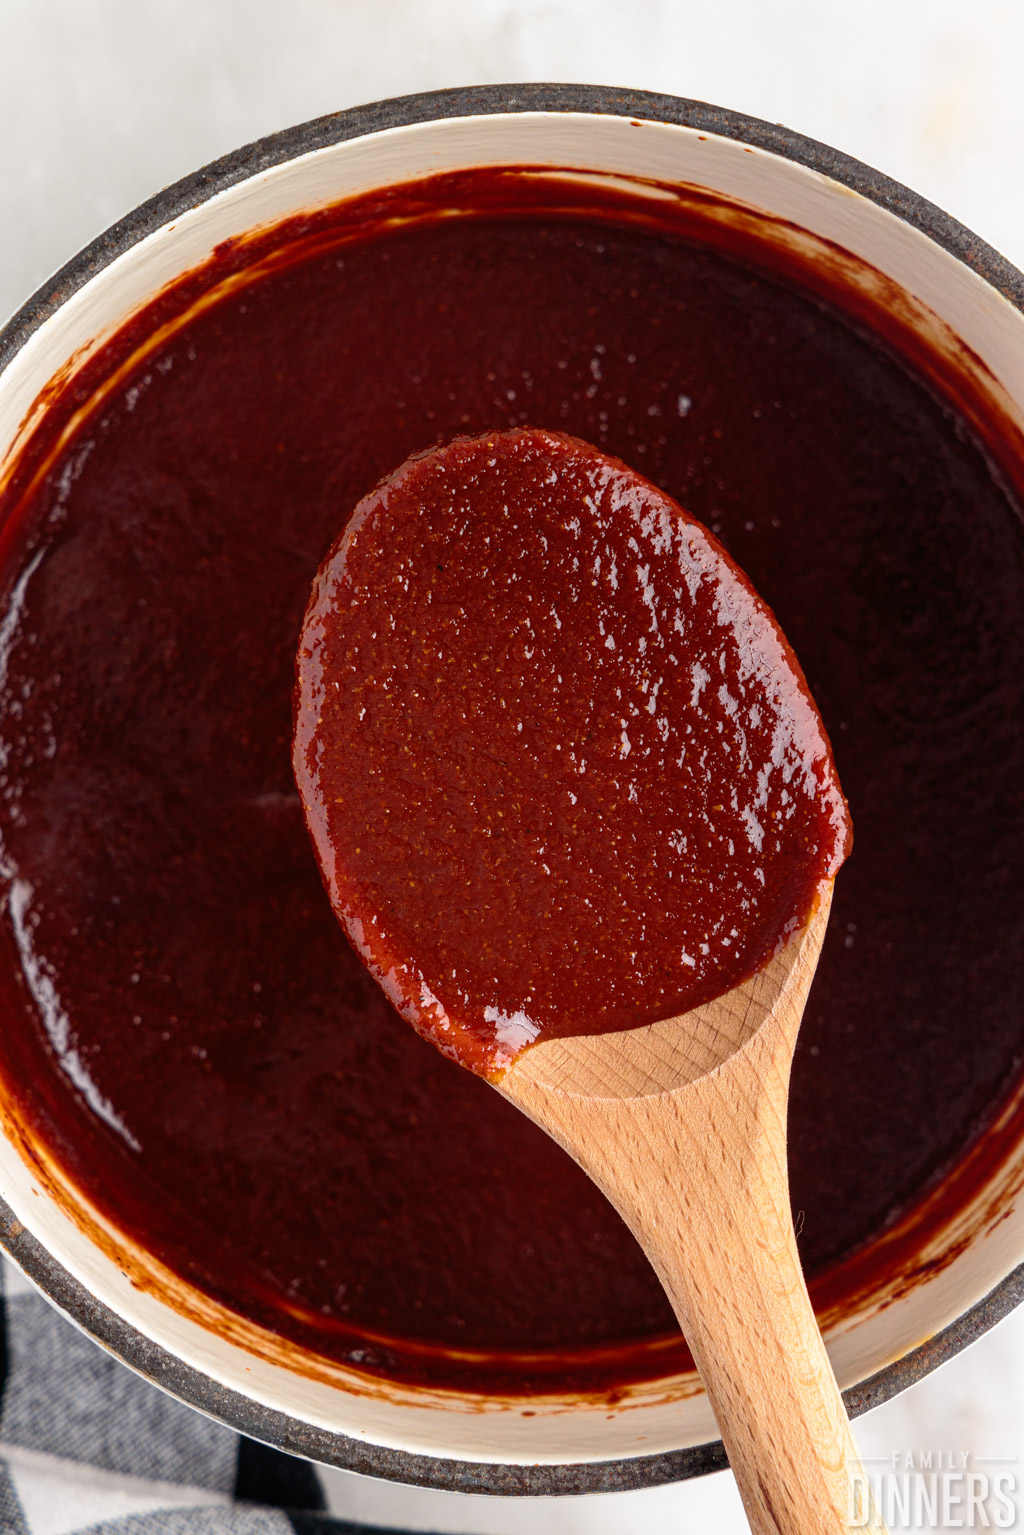 Spoonful of bbq sauce.